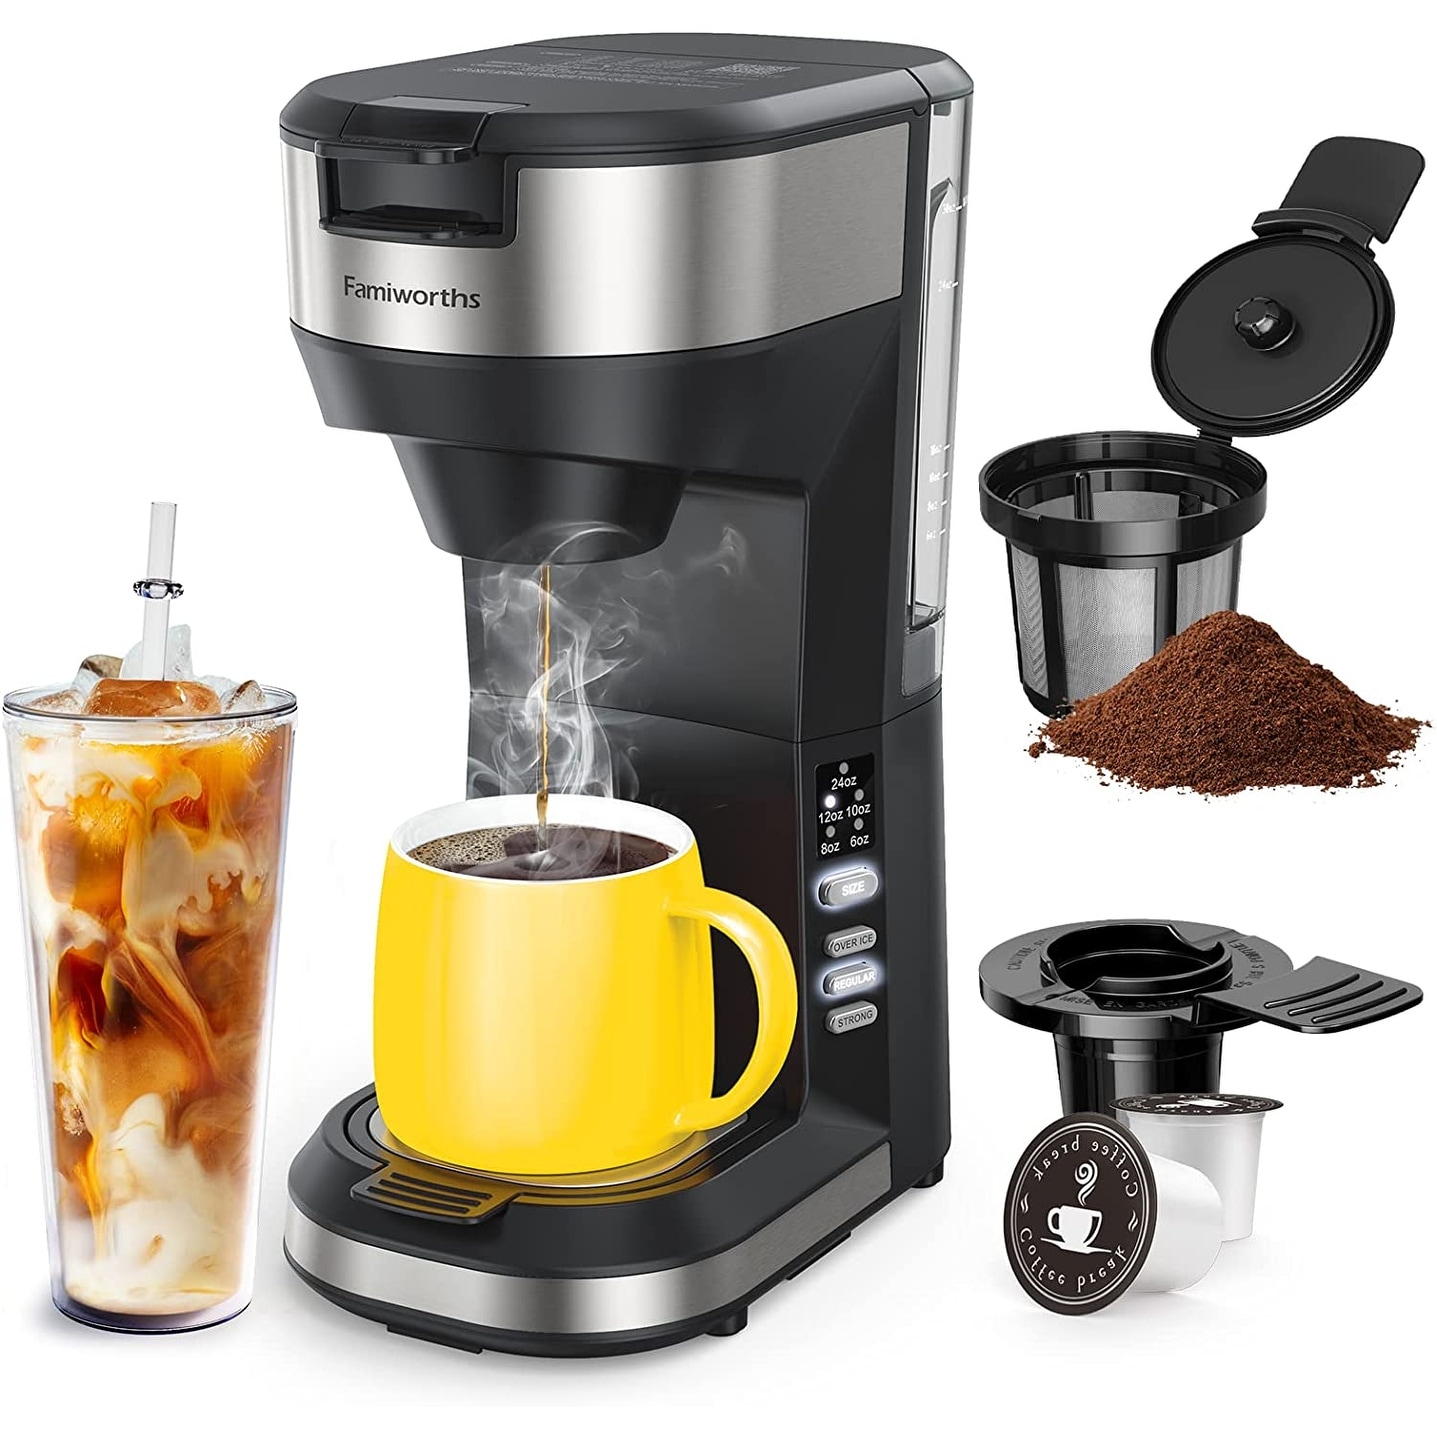 Hot and Iced Coffee Maker for K Cups and Ground Coffee, 4-5 Cups Coffee Maker and Single-serve Brewers